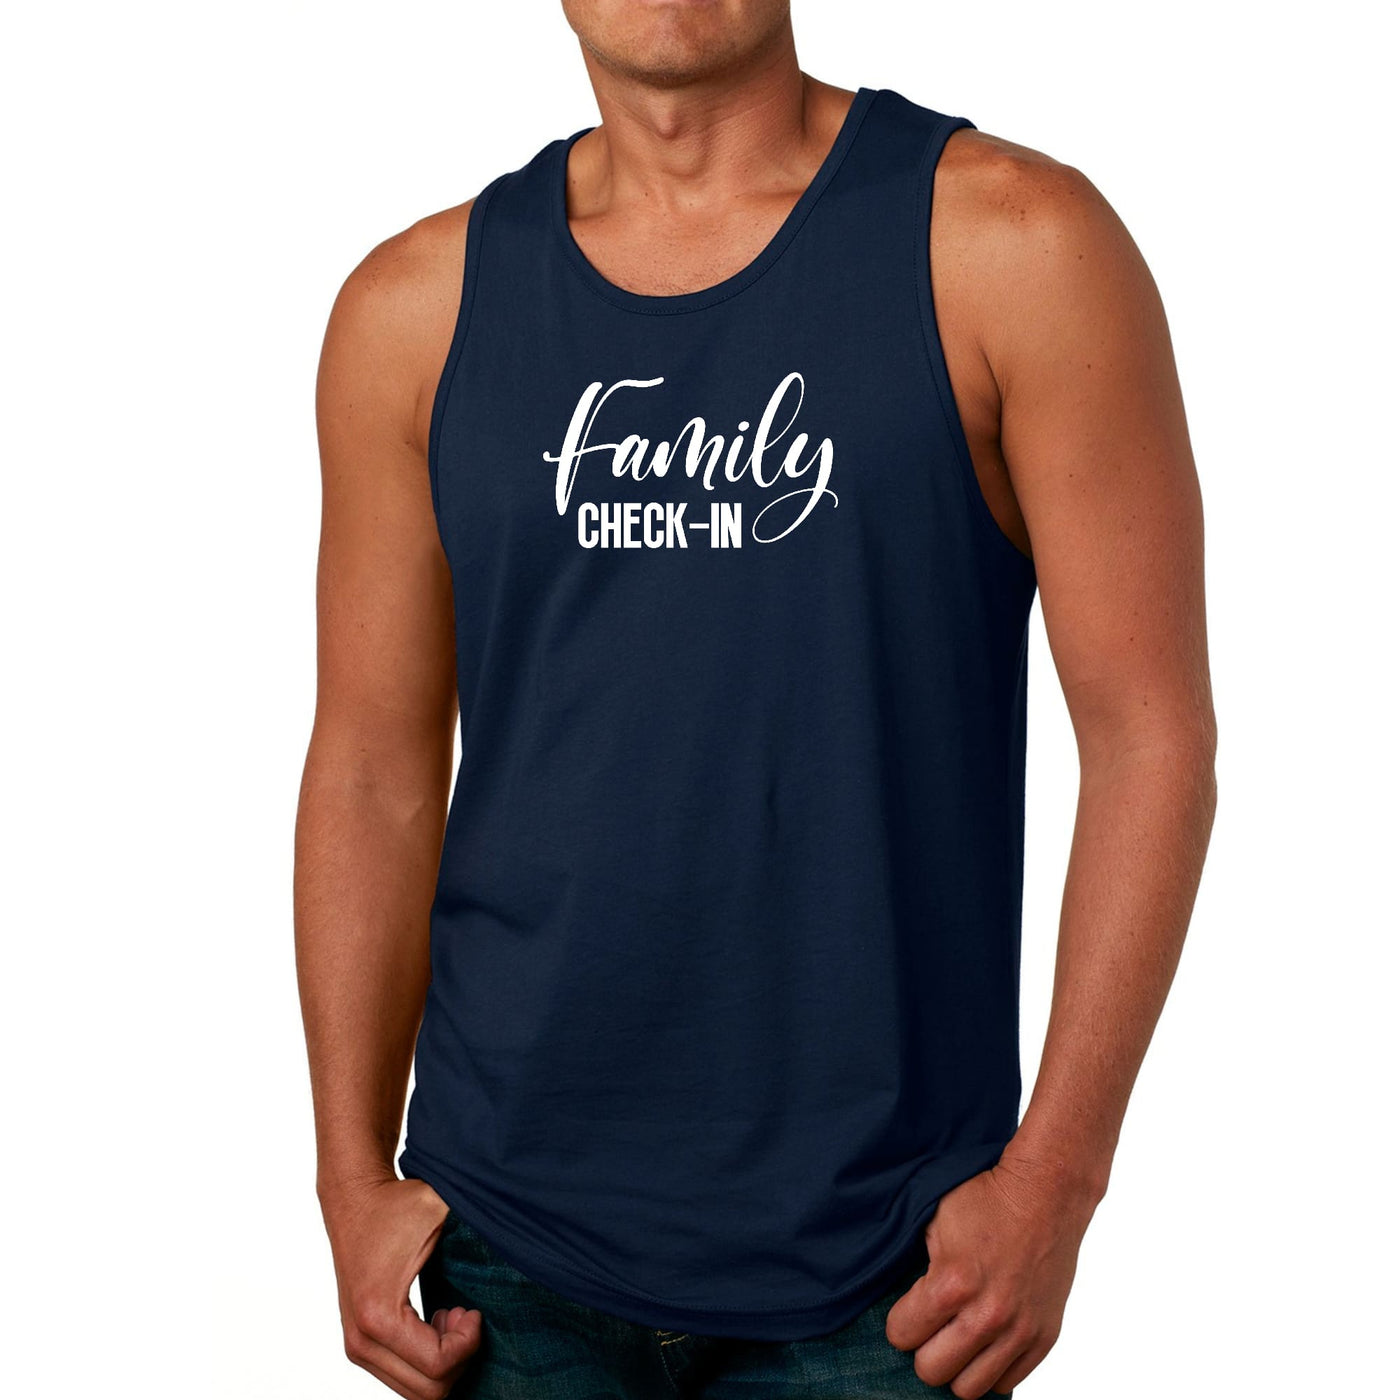 Mens Fitness Tank Top Graphic T-shirt Family Check-in Illustration - Mens